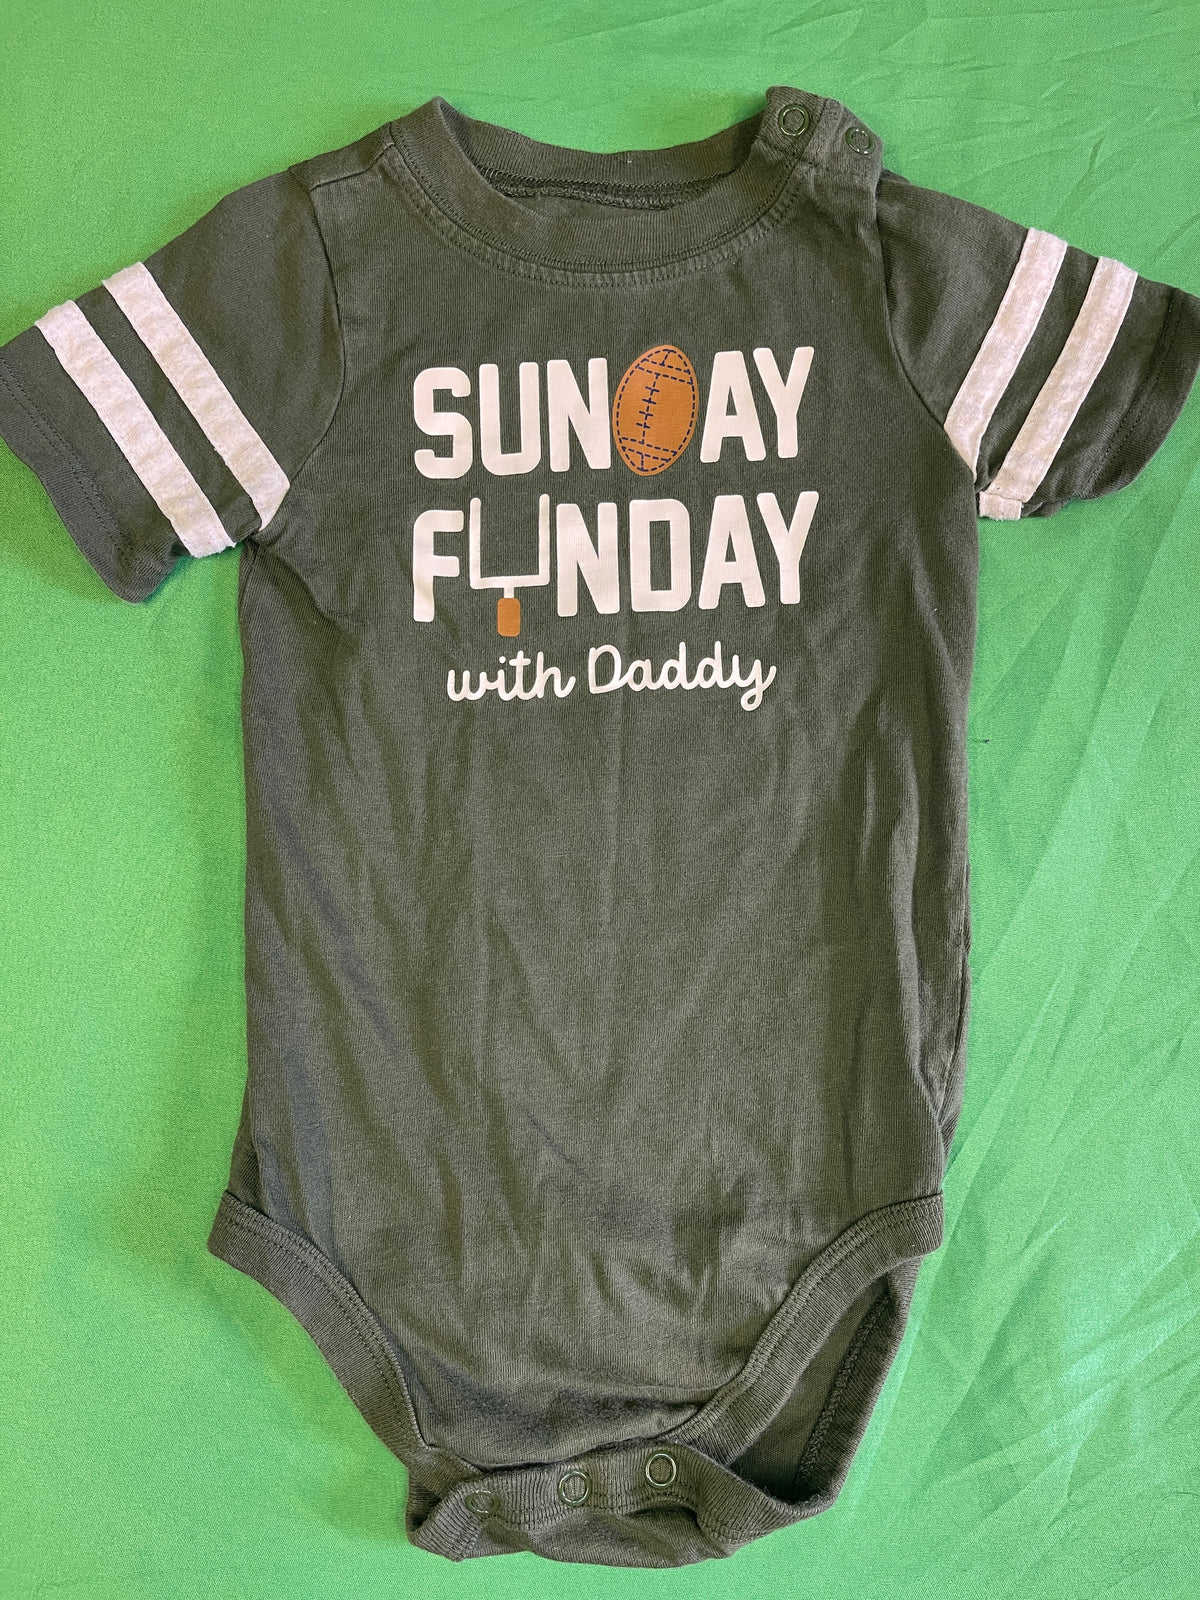 American Football "Sunday Funday with Daddy" Bodysuit/Vest 18 Months